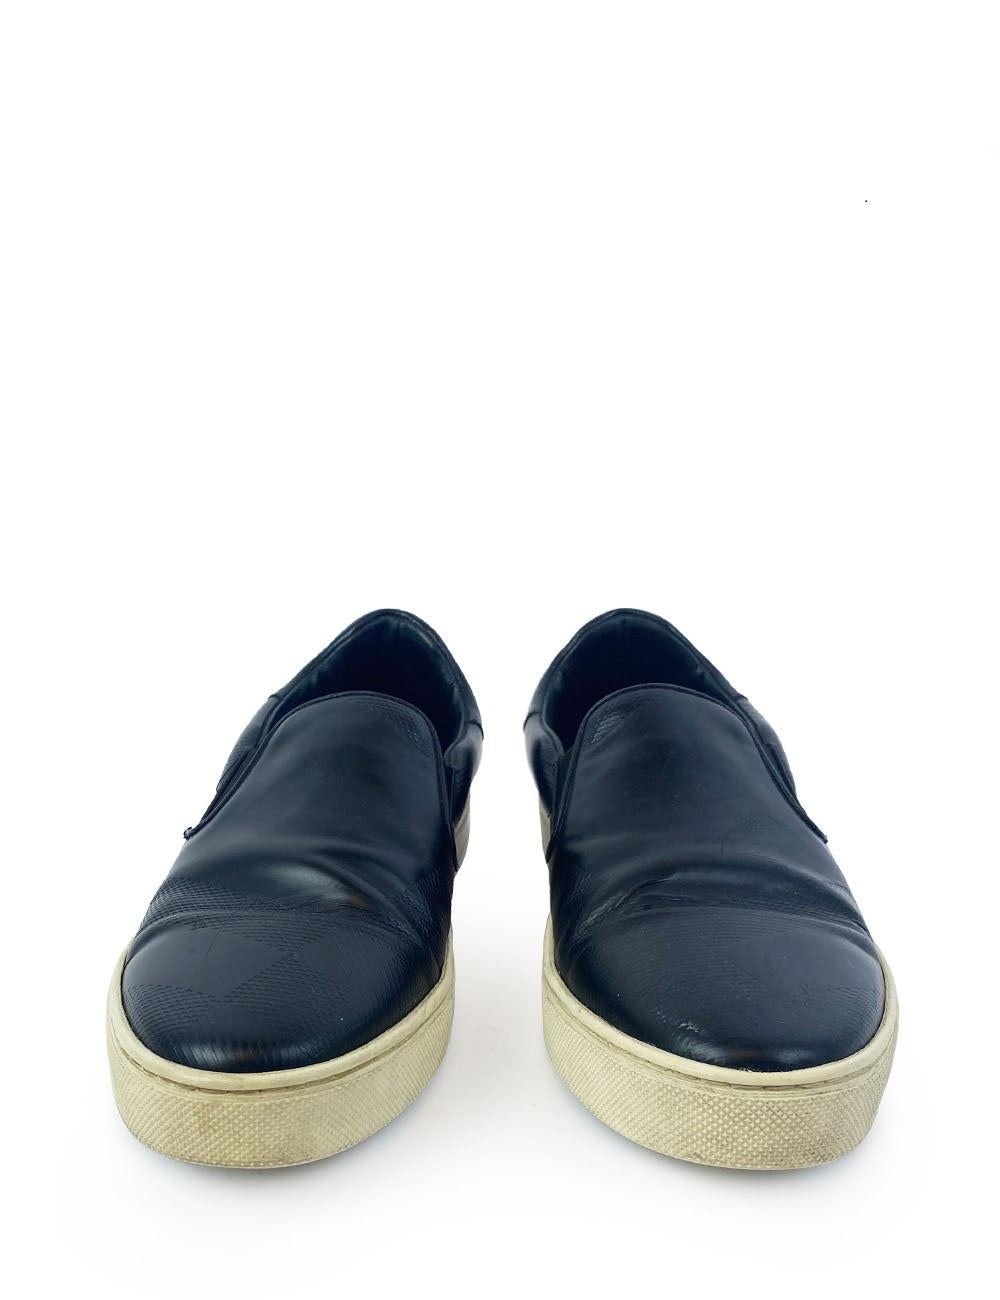 Burberry Black Slip on Leather Loafers Size EU 41.5 In Fair Condition For Sale In Amman, JO